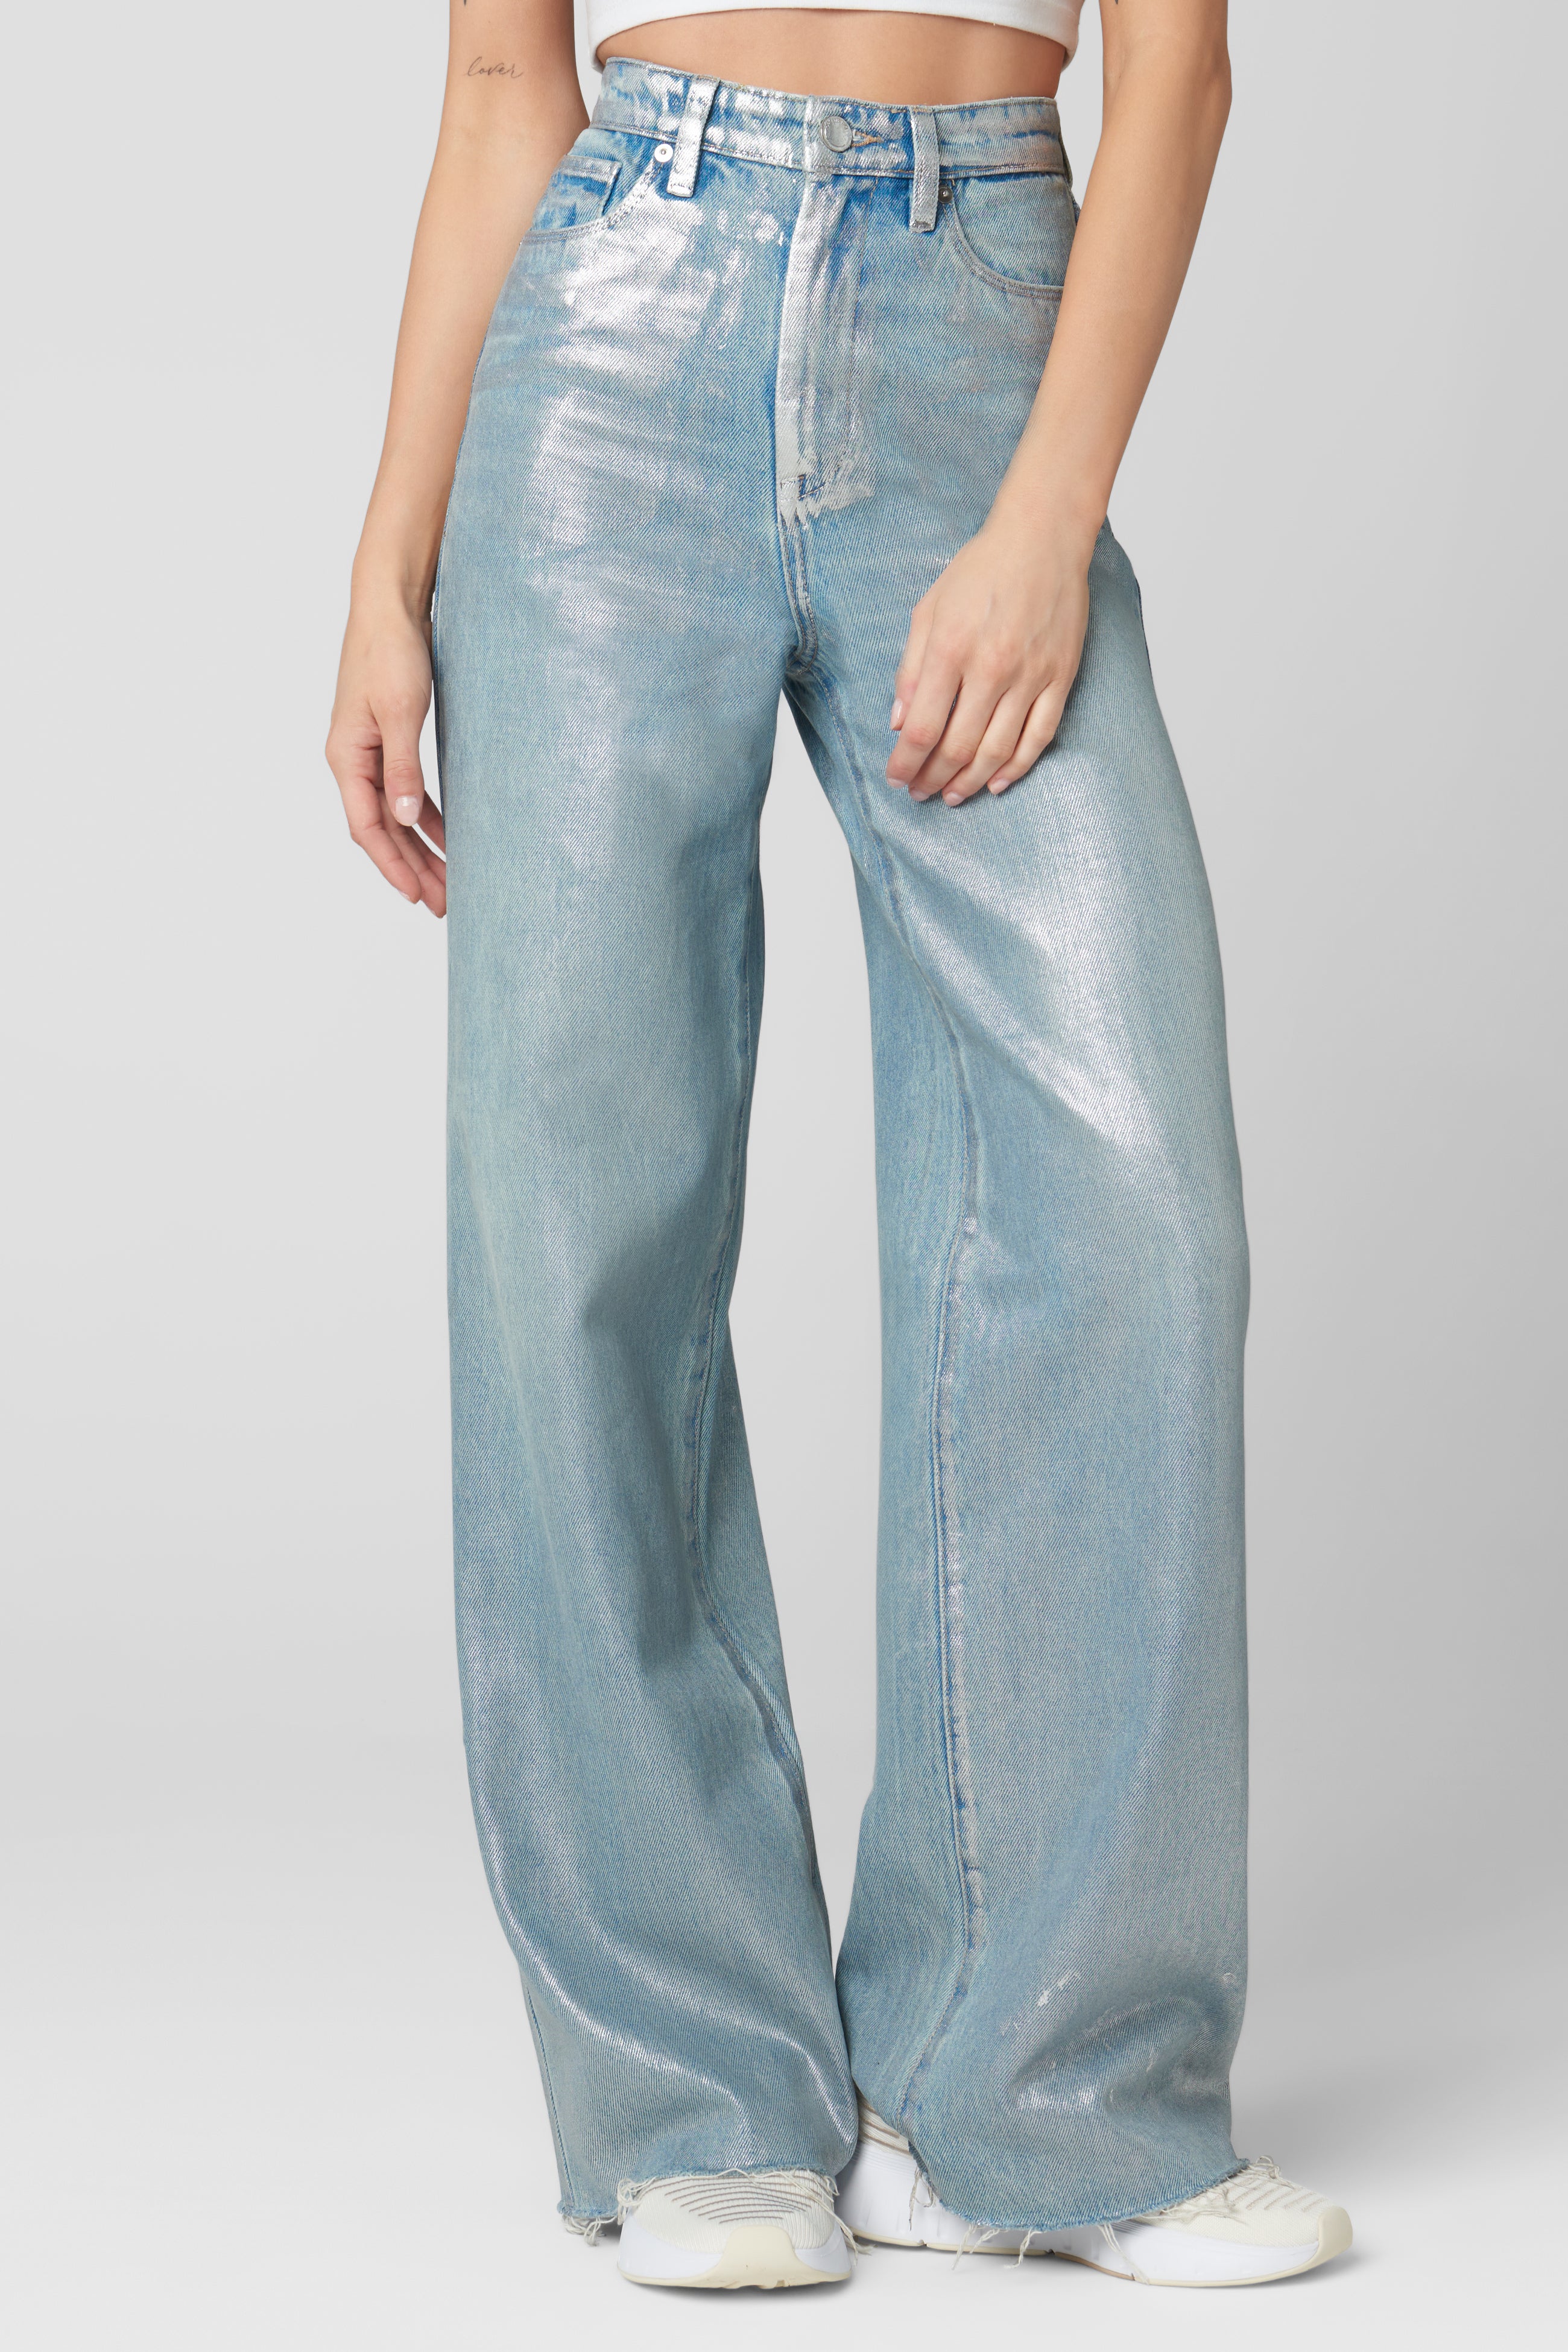 Franklin In Silver Star Pant